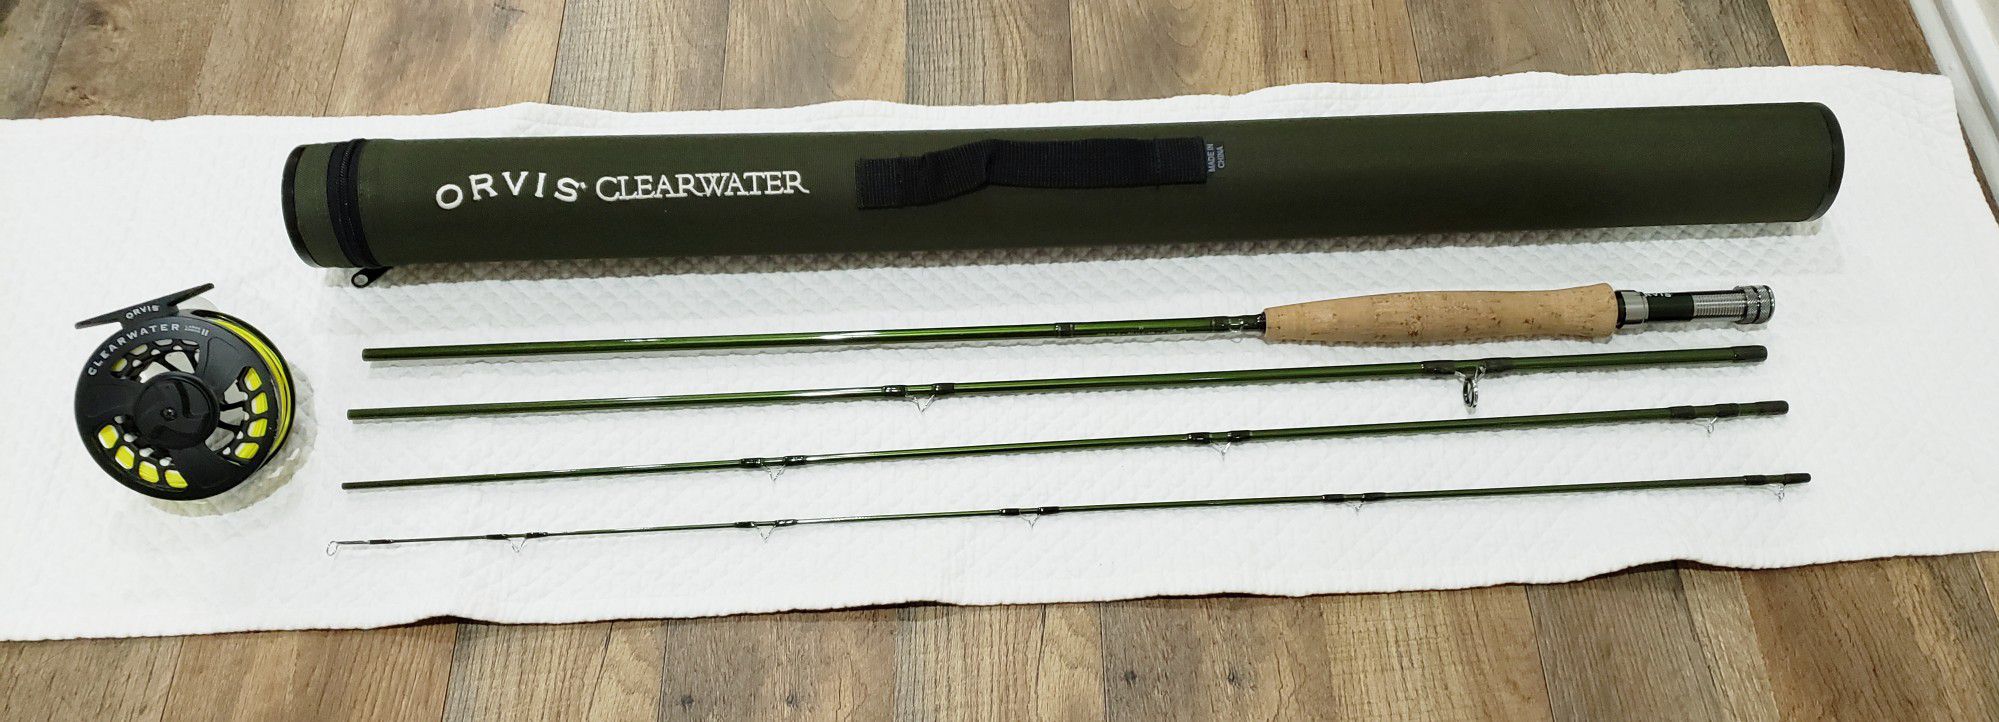  9ft Orvis Clearwater Fly Fishing  Rod 905 4 Pcs with Loaded Large Arbor 2 Reel (ONLY USED 4 HOURS)